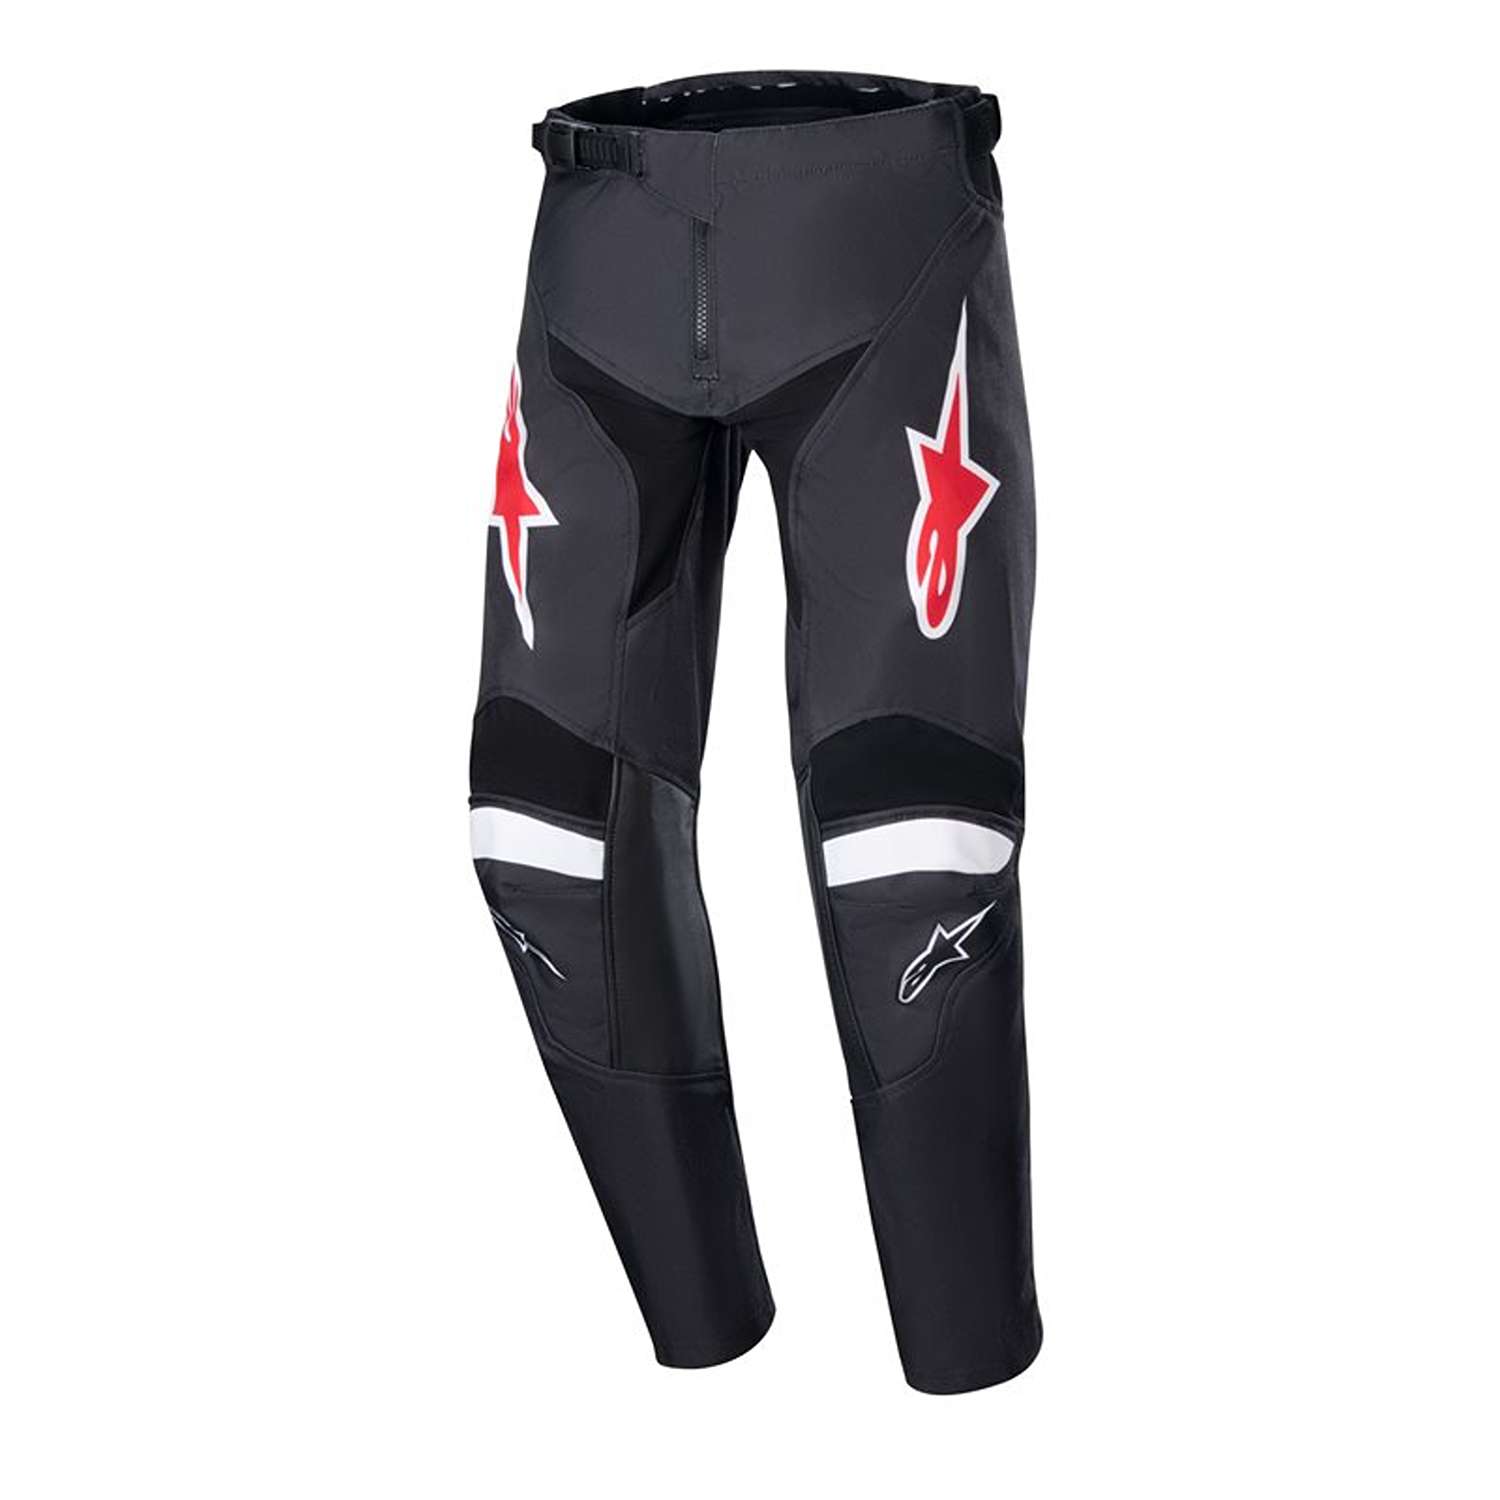 Image of Alpinestars Youth Racer Lucent Pants Black White Talla 26